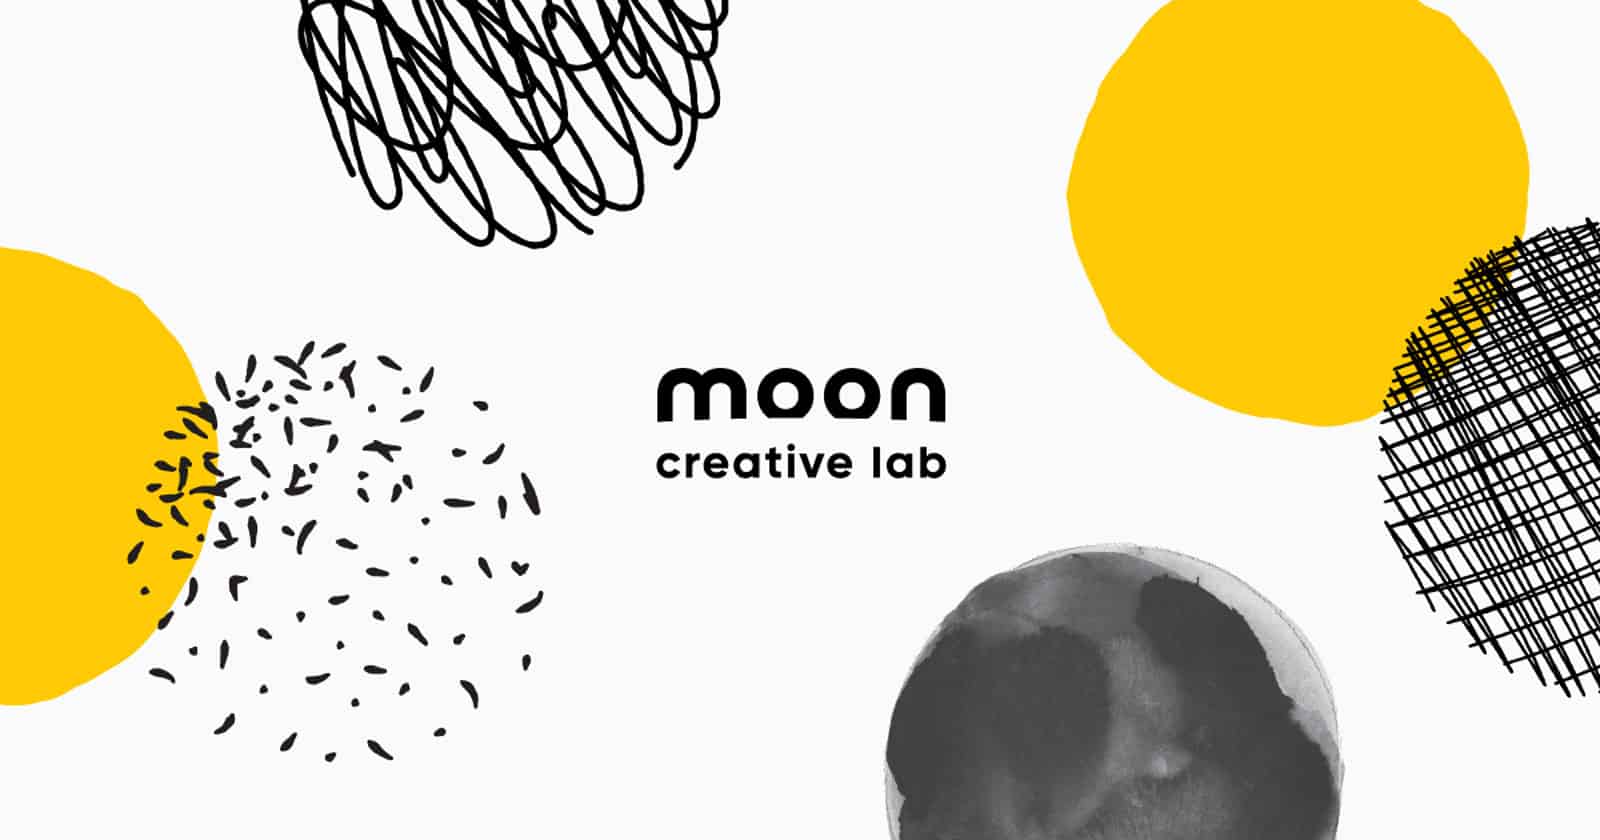 Moon Creative Lab by Mitsui & Co - Innovation Studio